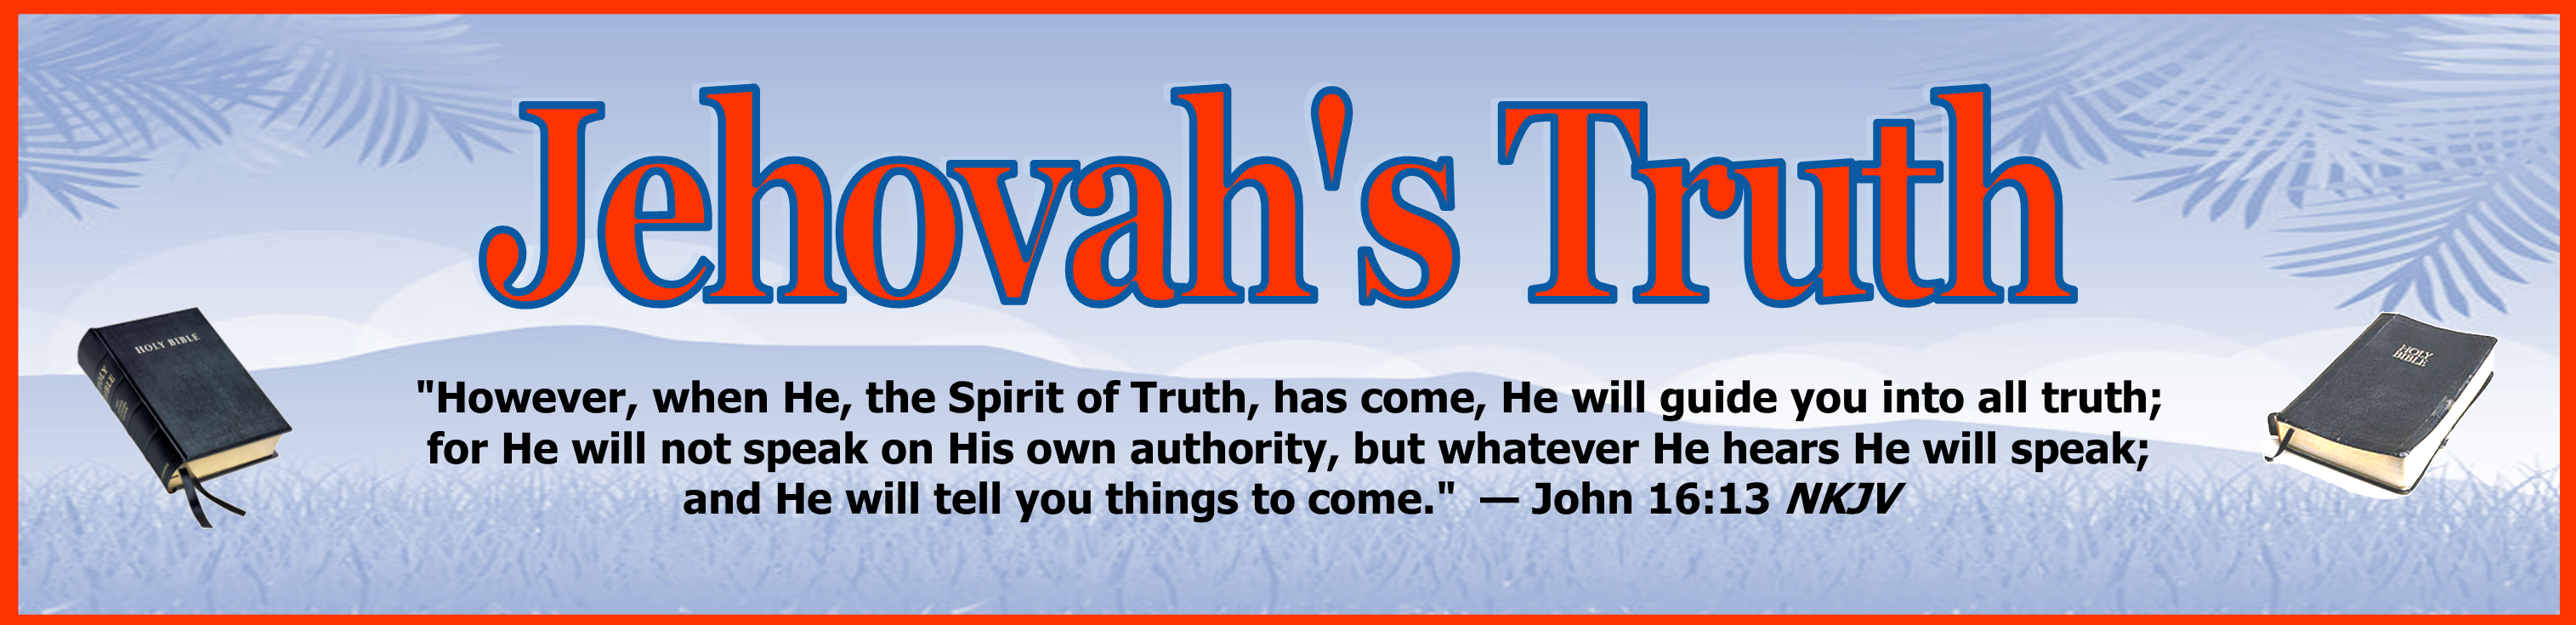 Jehovah's Truth